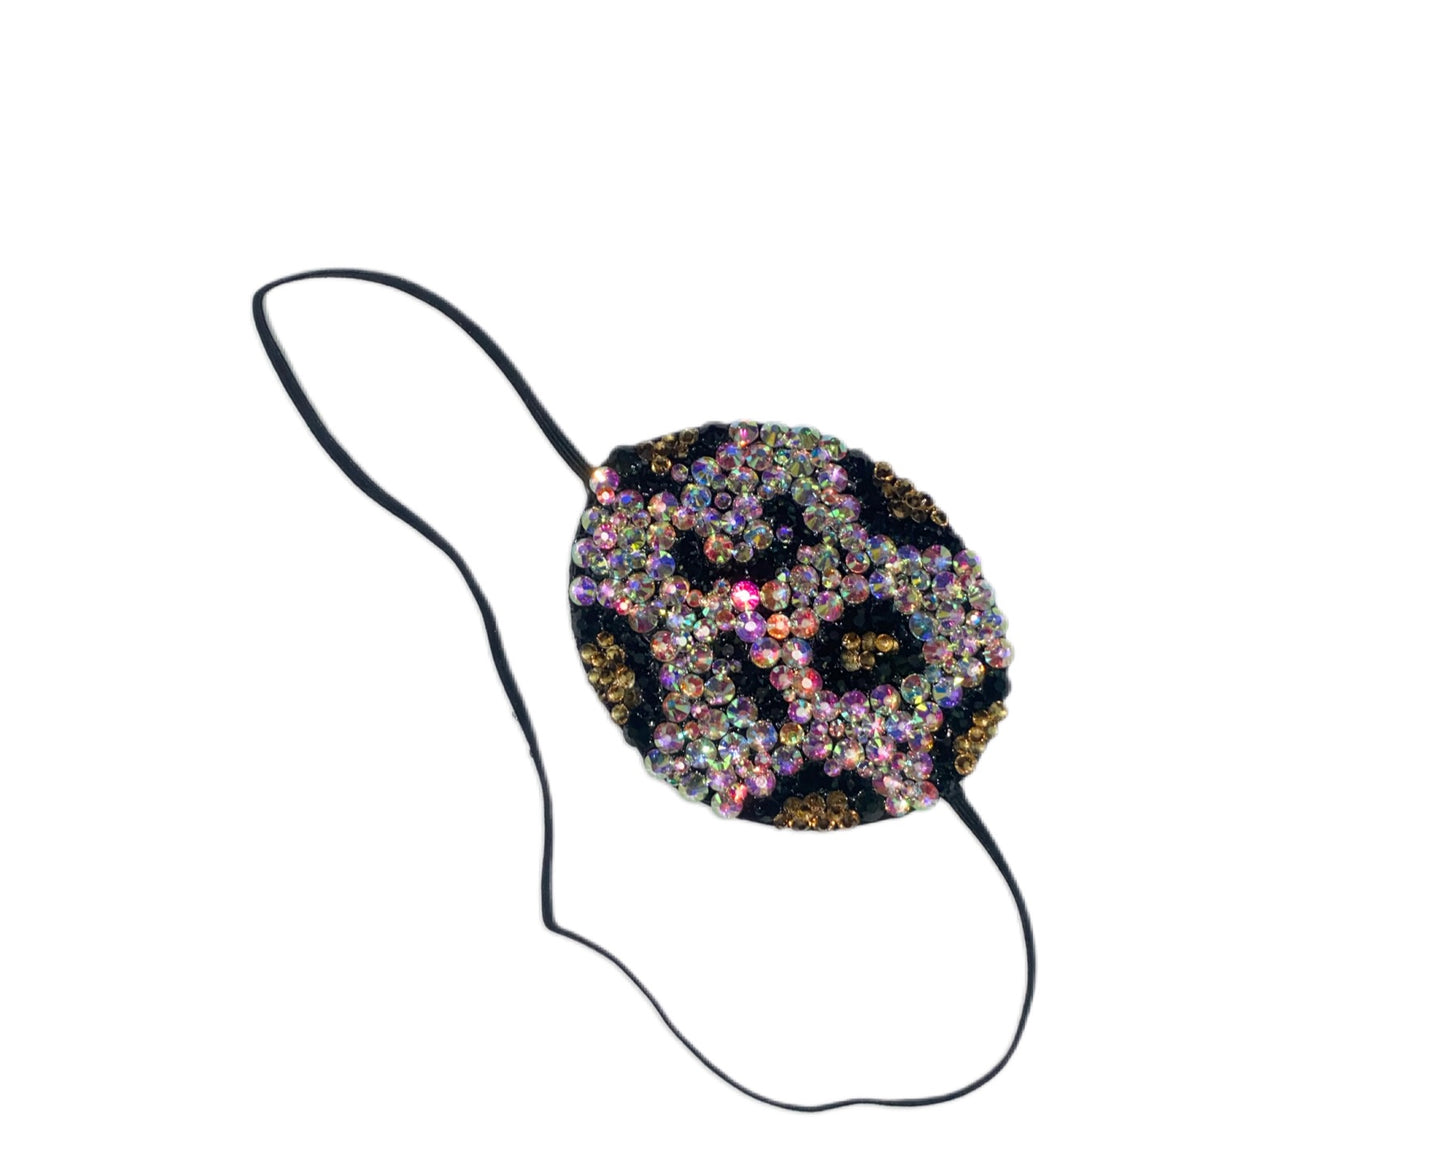 Black Eye Patch Bedazzled In Luxe Crystal AB Leopard Print Design